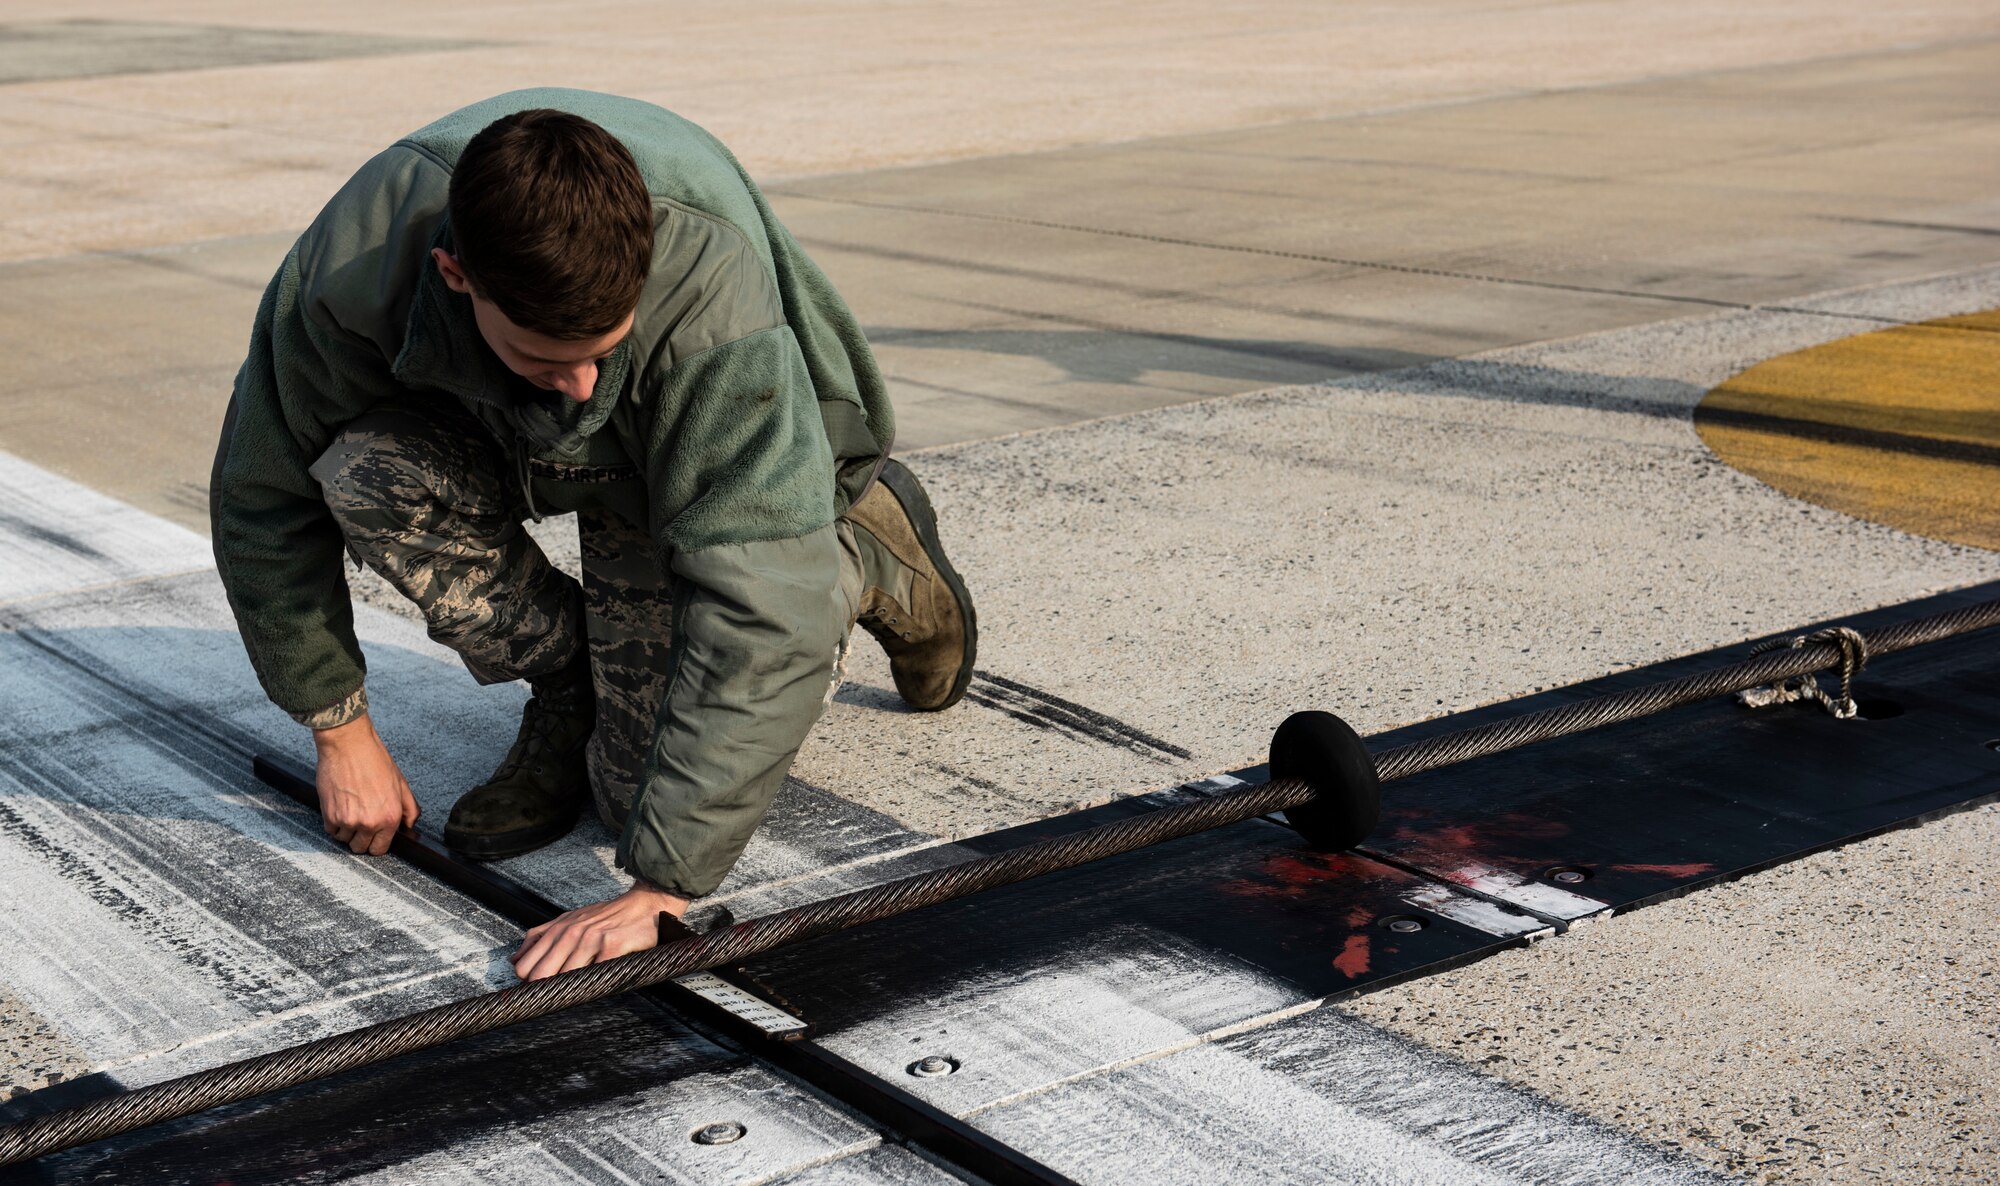 U.S. Air Force Airman 1st Class Zane Mammon, 8th Civil Engineer Squadron electical power production specalis, measures the height of a barrier arresting system at Kunsan Air Base, Republic of Korea, Dec. 19, 2018. The arresting system need to be two inches off the ground to allow enough froom for aircraft to pass over them while still being able to engage it if necessary. (U.S. Air Force photo by Senior Airman Stefan Alvarez)